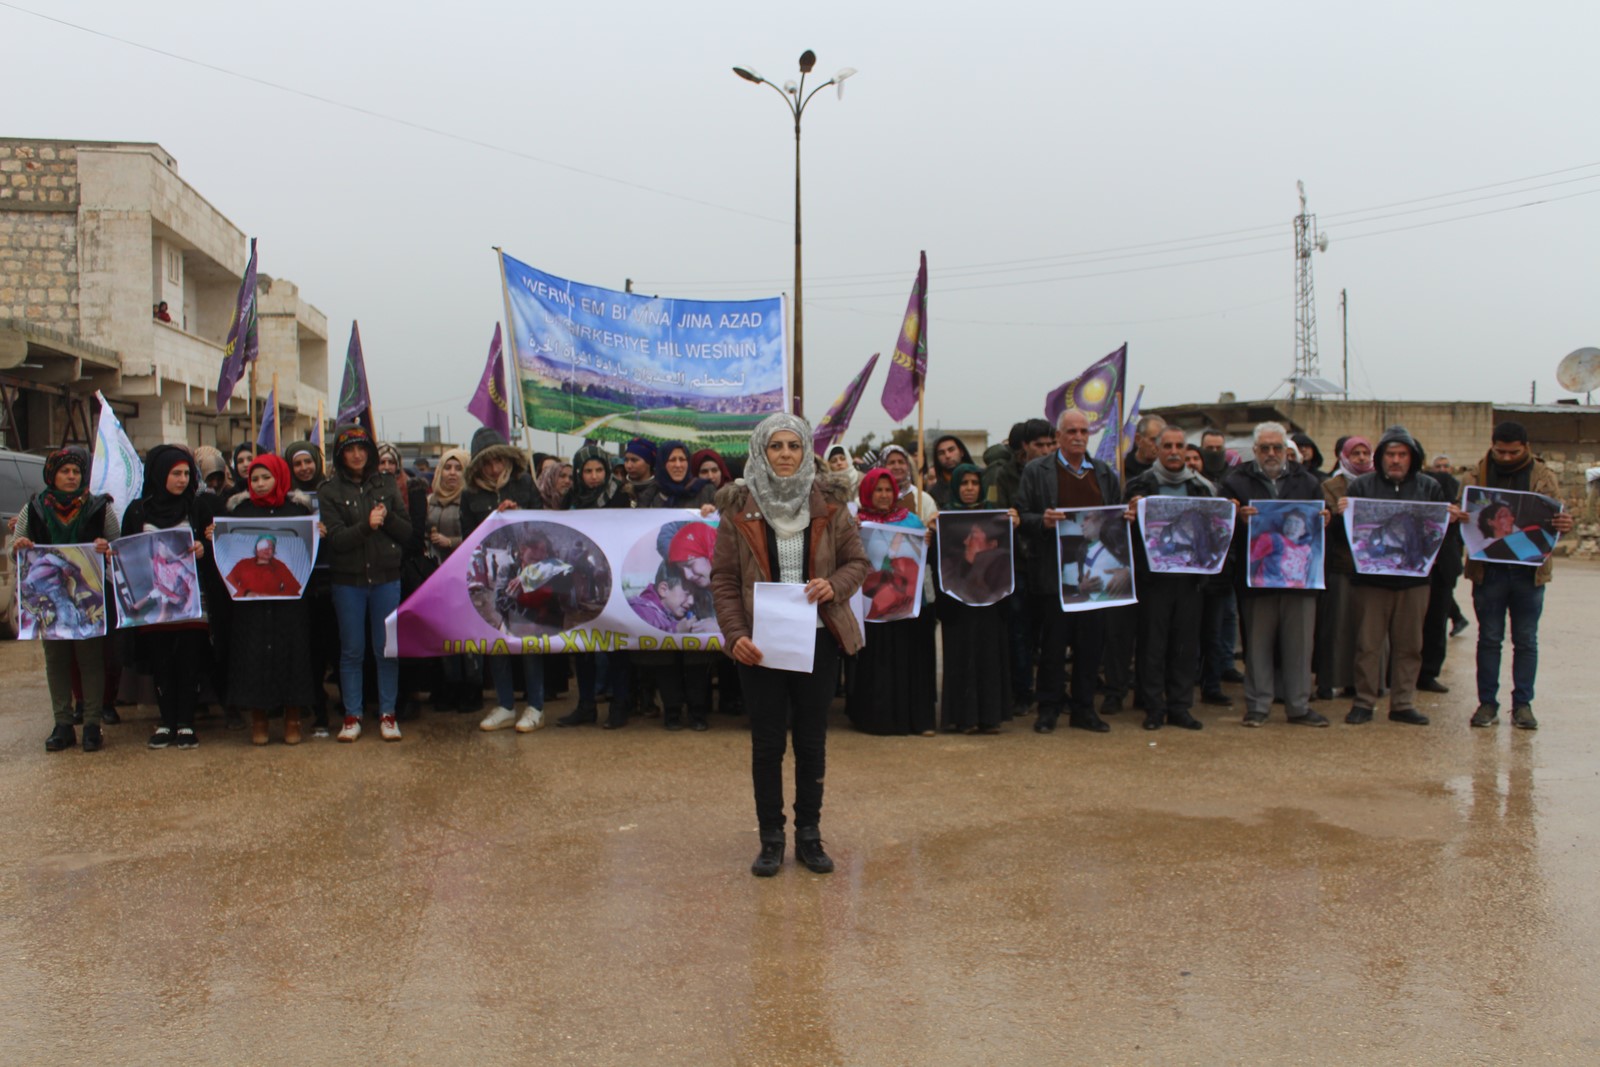 Free Women’s Union in al-Shahba denounce occupation, Turkish threats to Afrin, north Syria